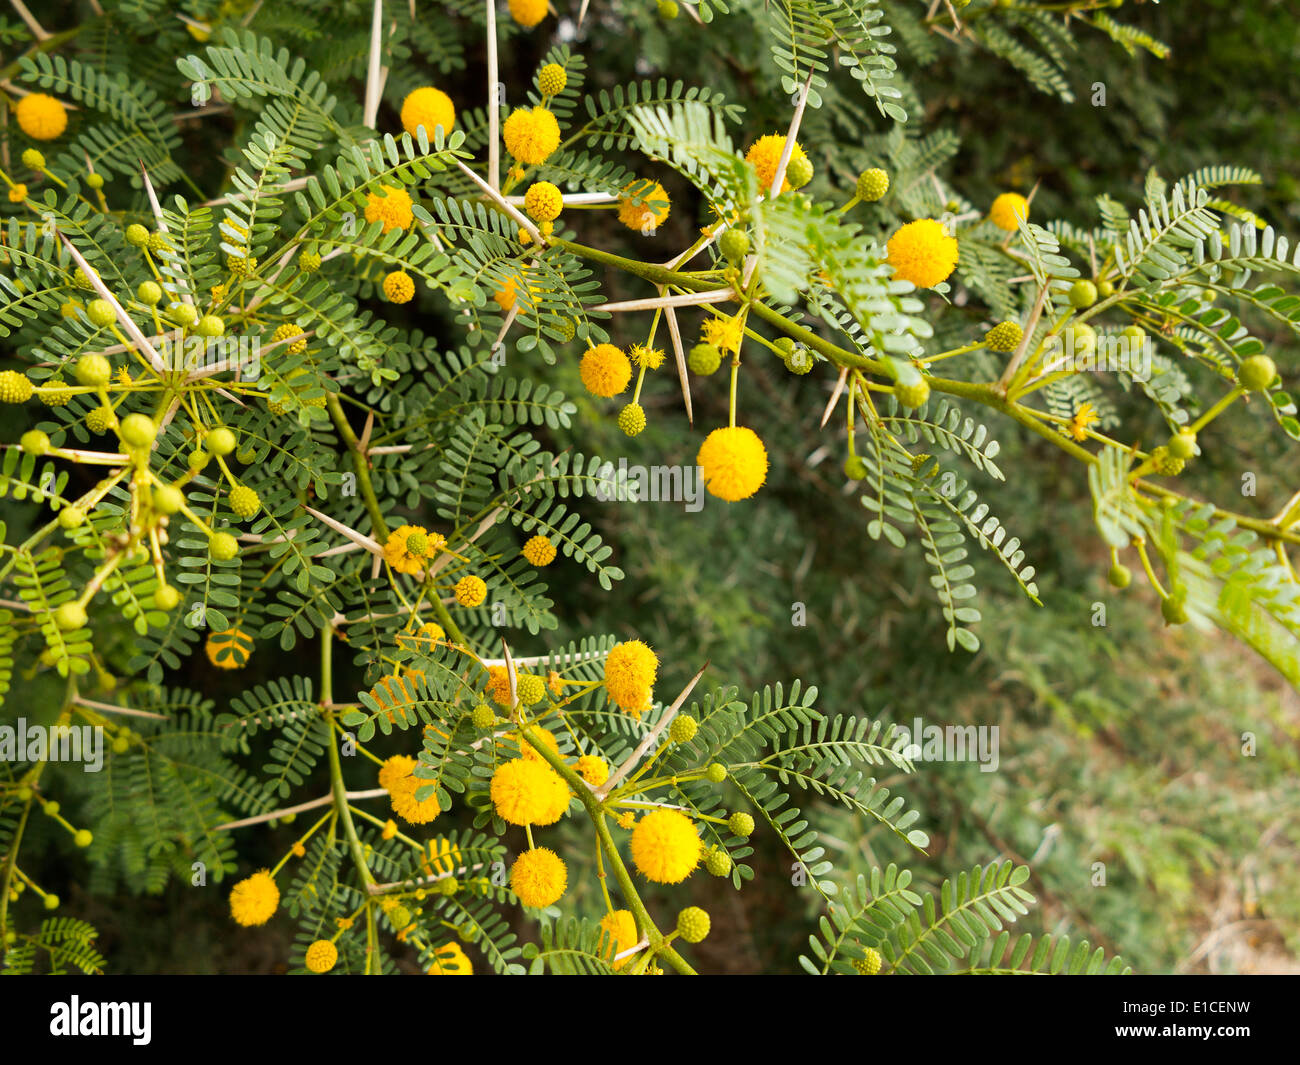 Detail of a Vachellia farnesiana bush with yellow flowers and spines Stock Photo